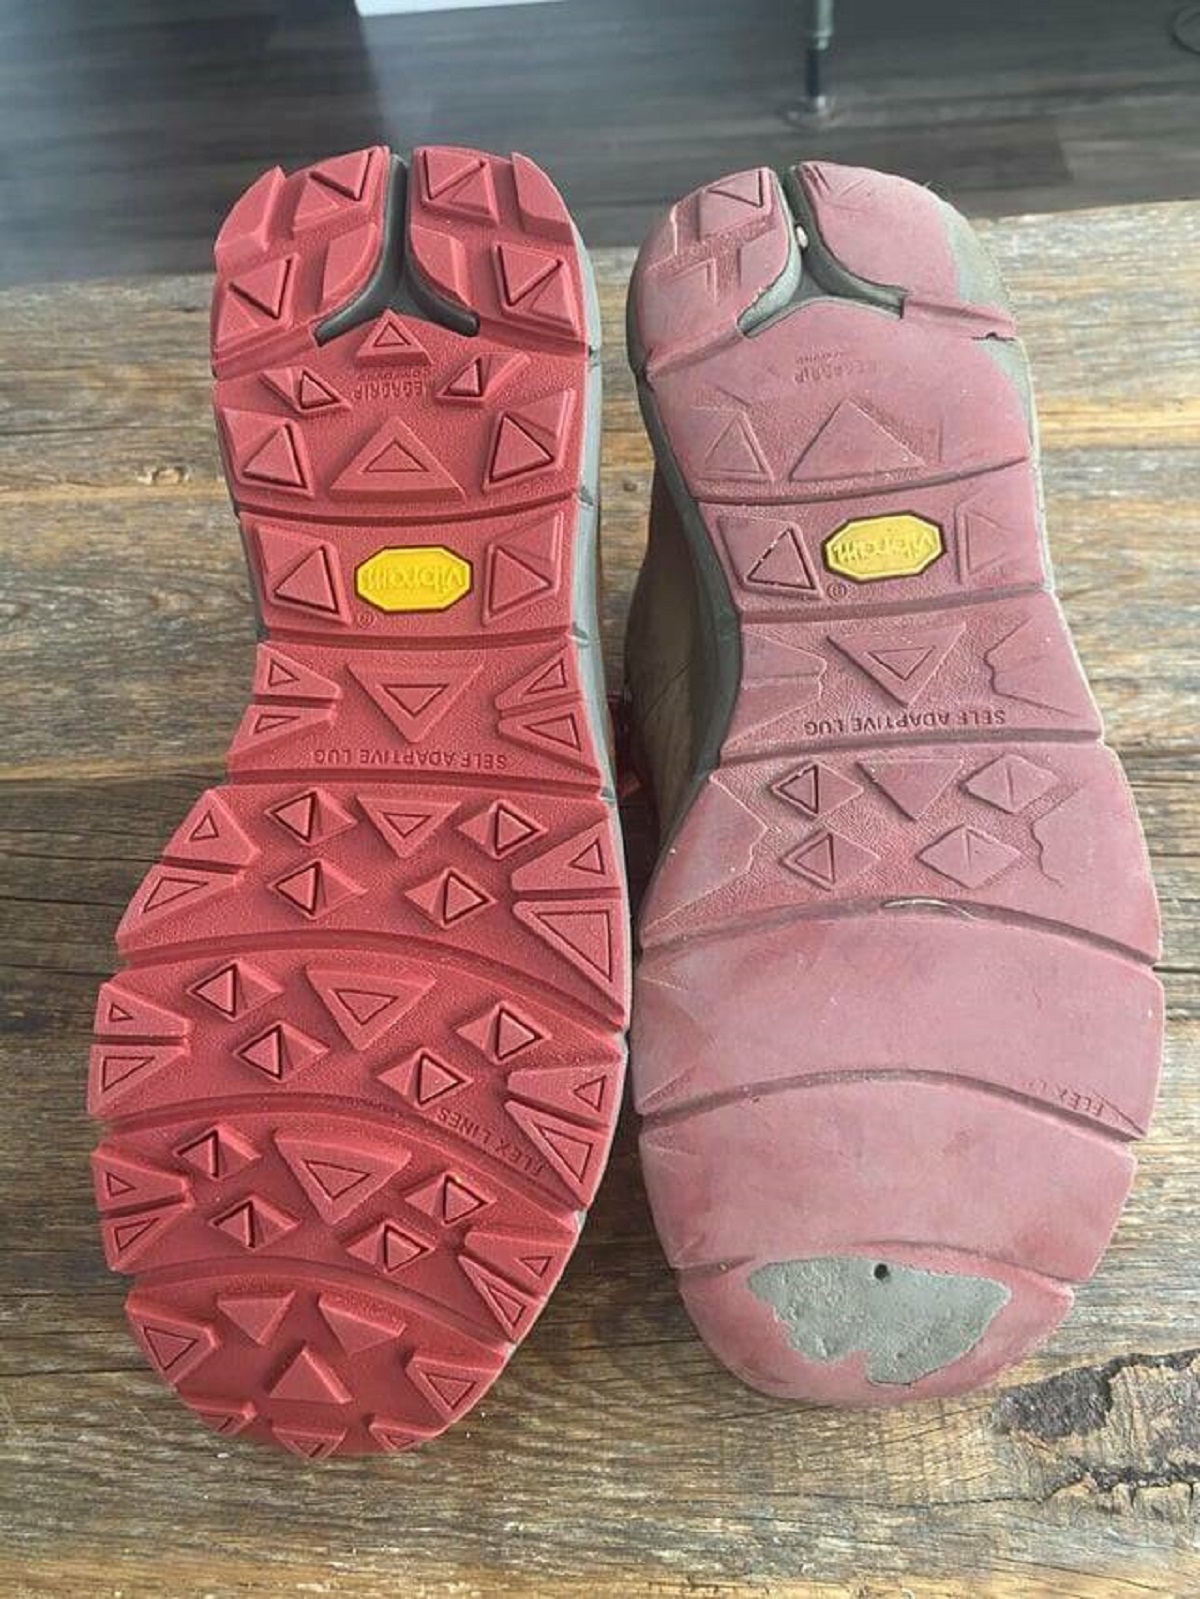 "Wear and tear on hiking boots, Size 10.5, new vs. old"